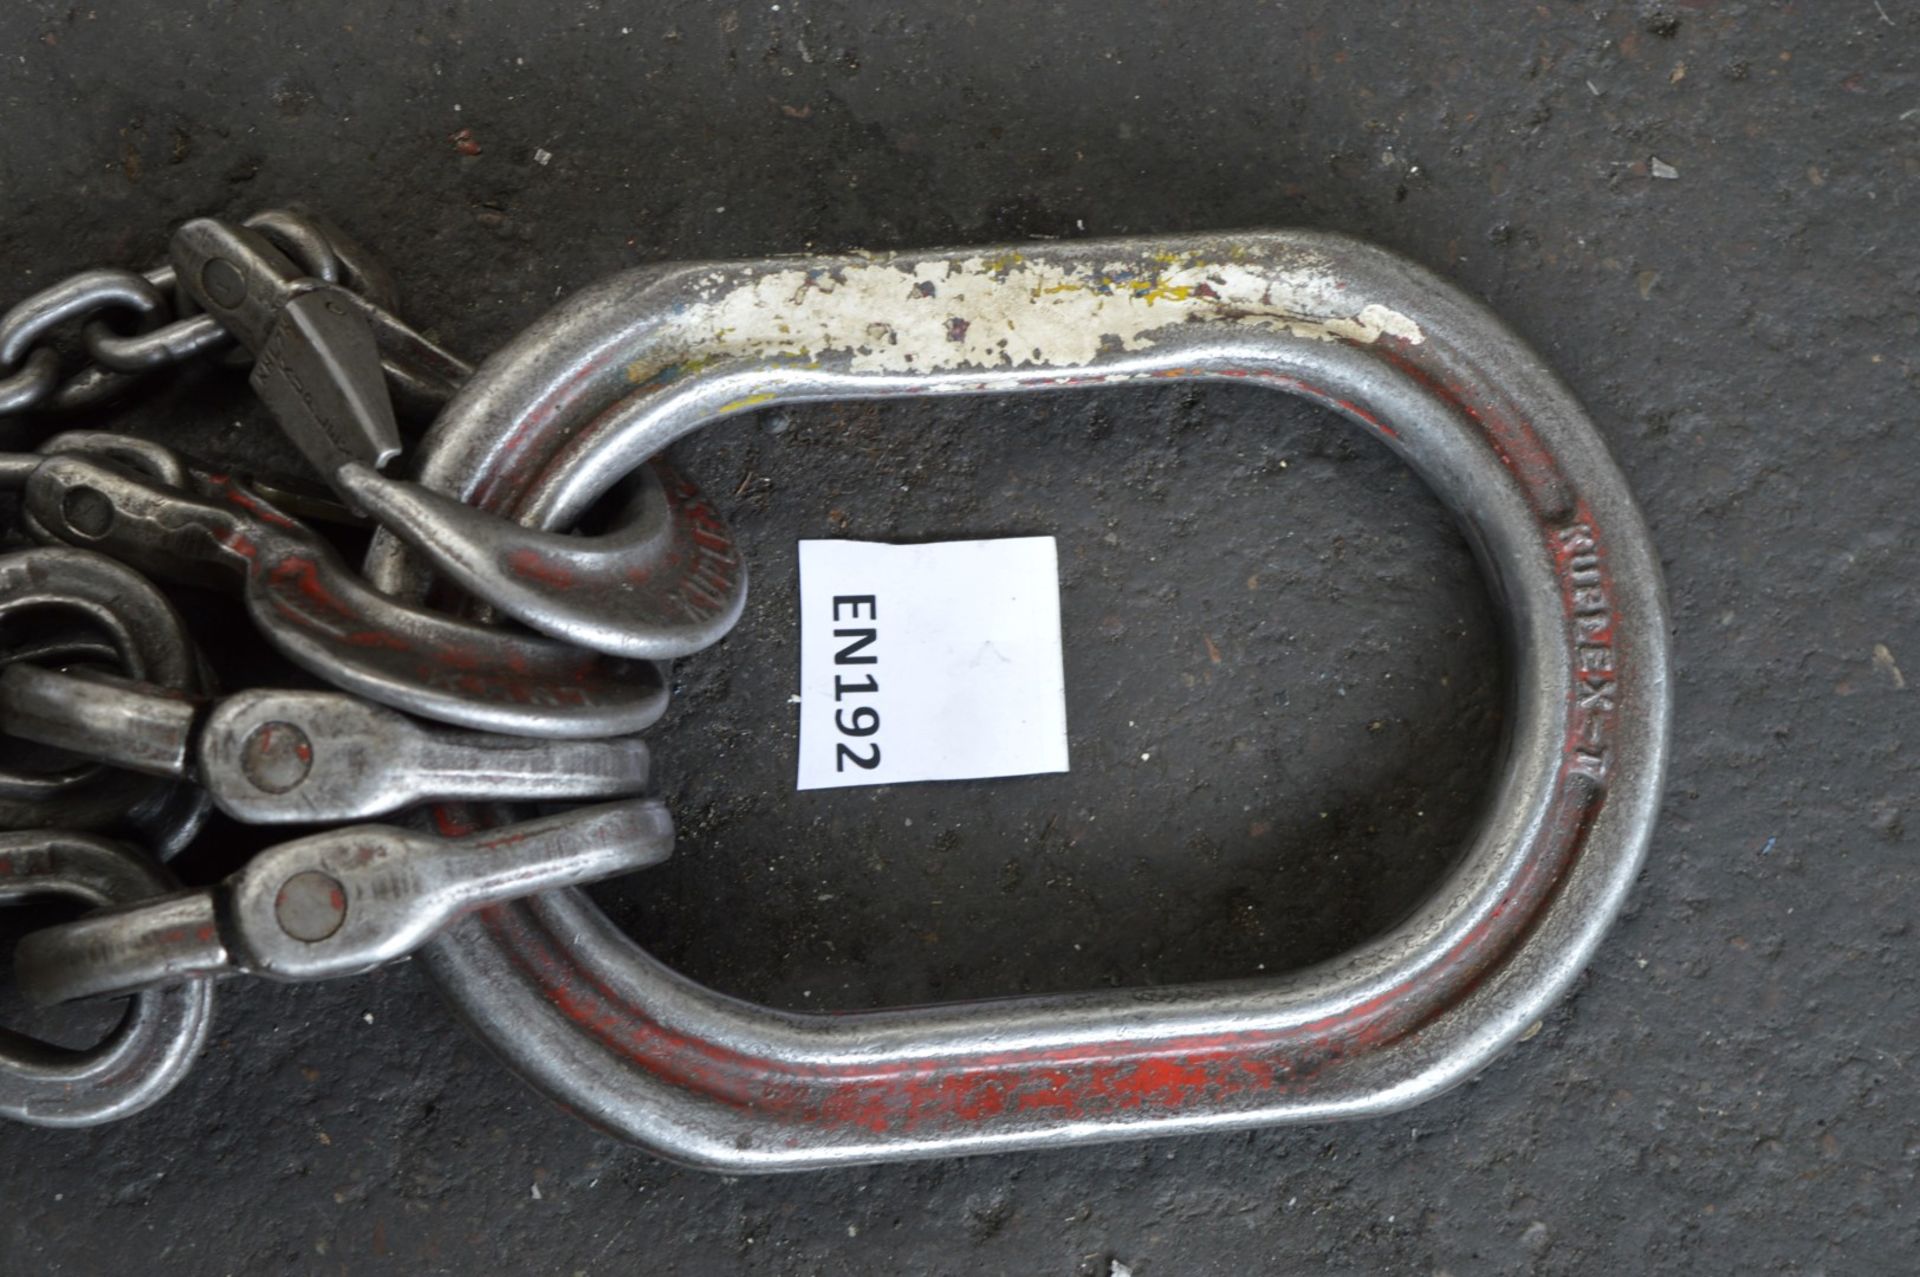 1 x Kuplex Lifting Chain With Various Sling Eye Hooks - Heavy Duty Lifting Equipment - CL202 - Ref - Image 5 of 7